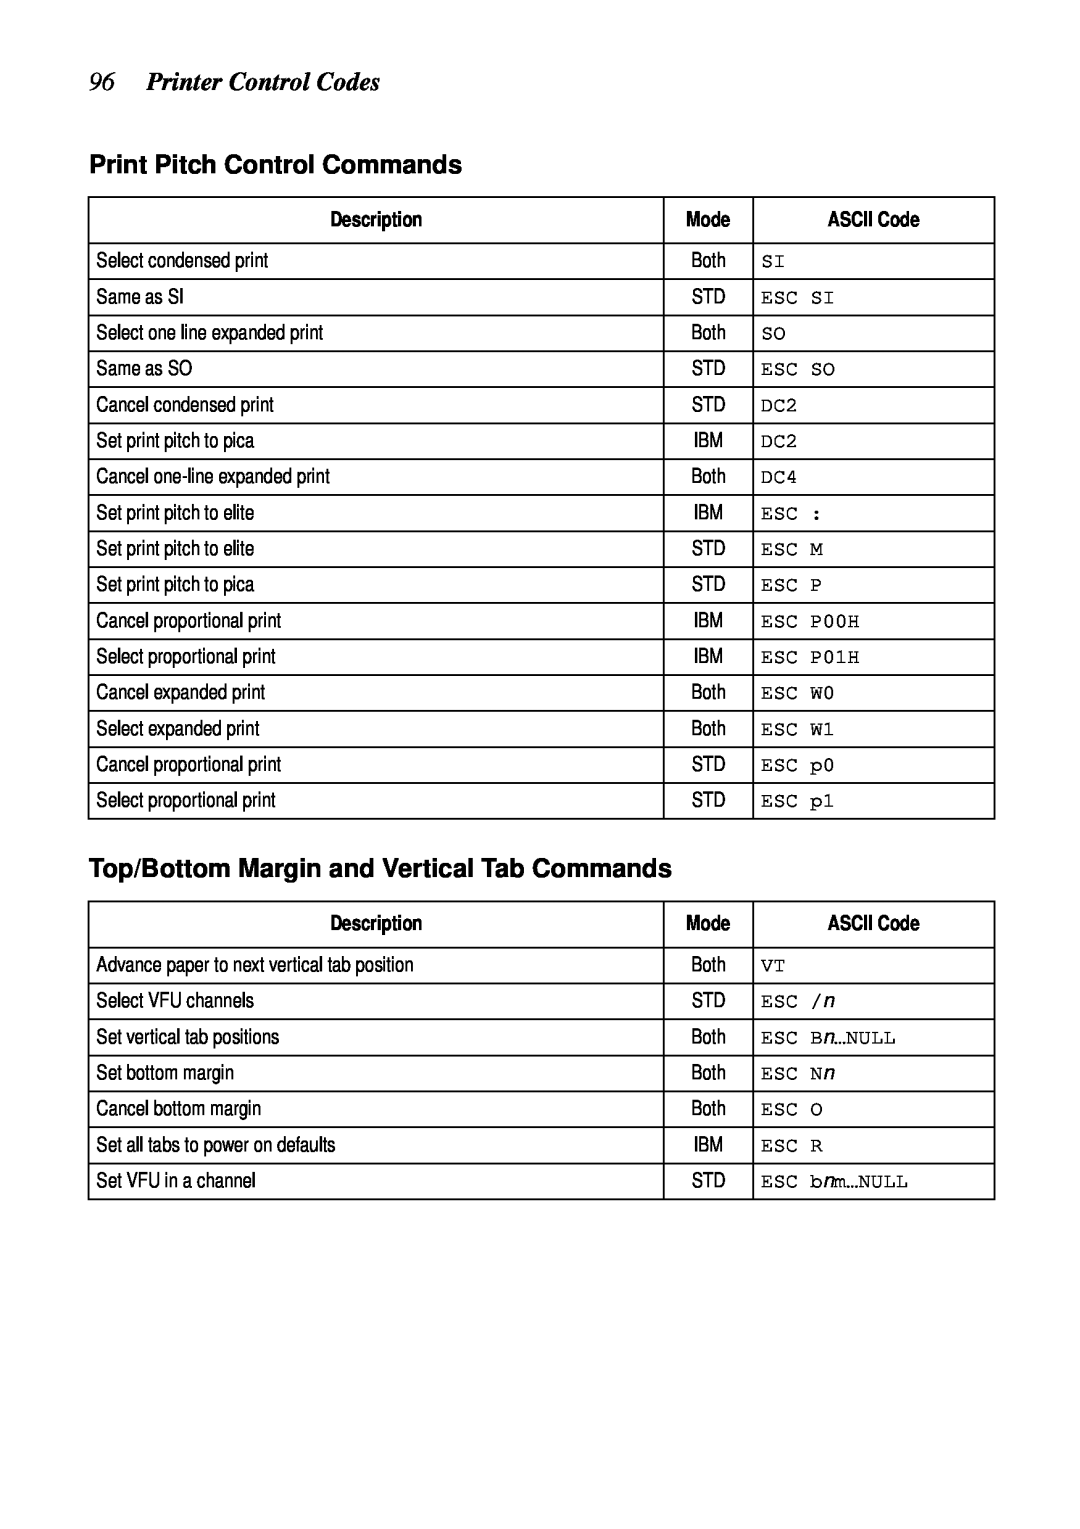 Star Micronics LC-1521 Printer Control Codes, Print Pitch Control Commands, Top/Bottom Margin and Vertical Tab Commands 